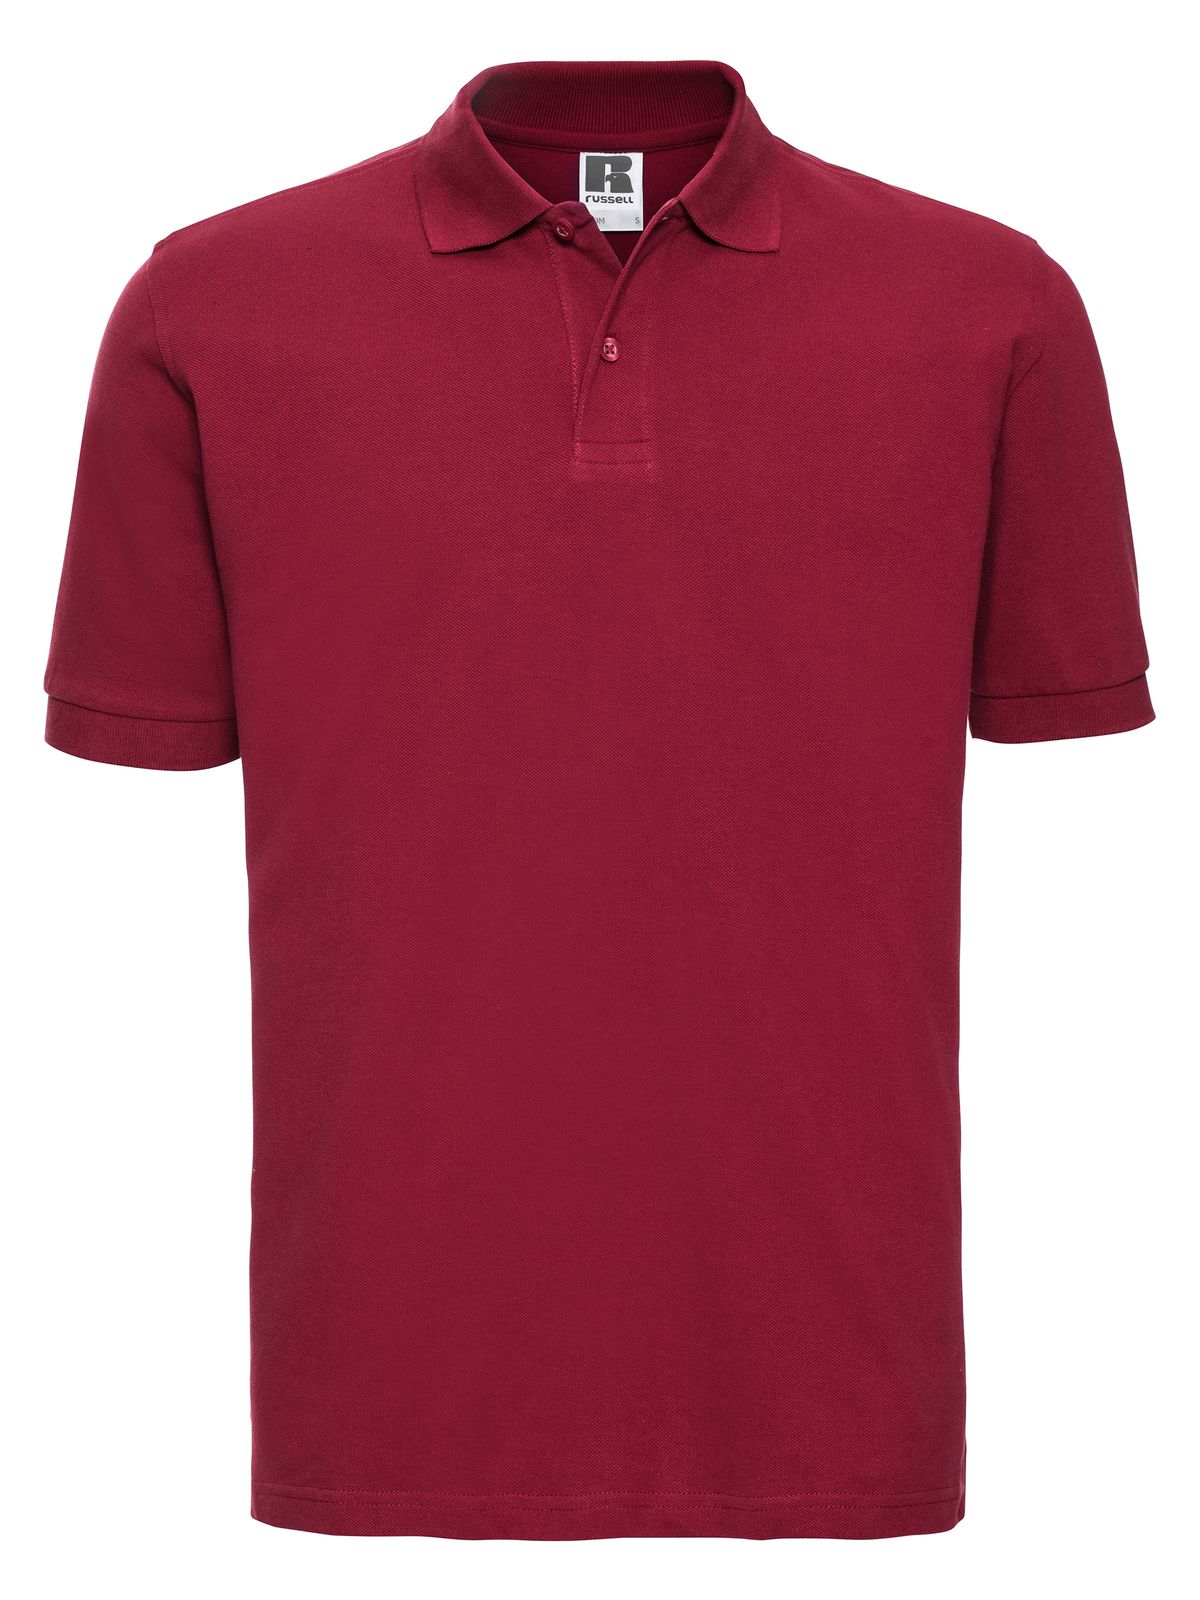 mens-classic-cotton-polo-classic-red.webp